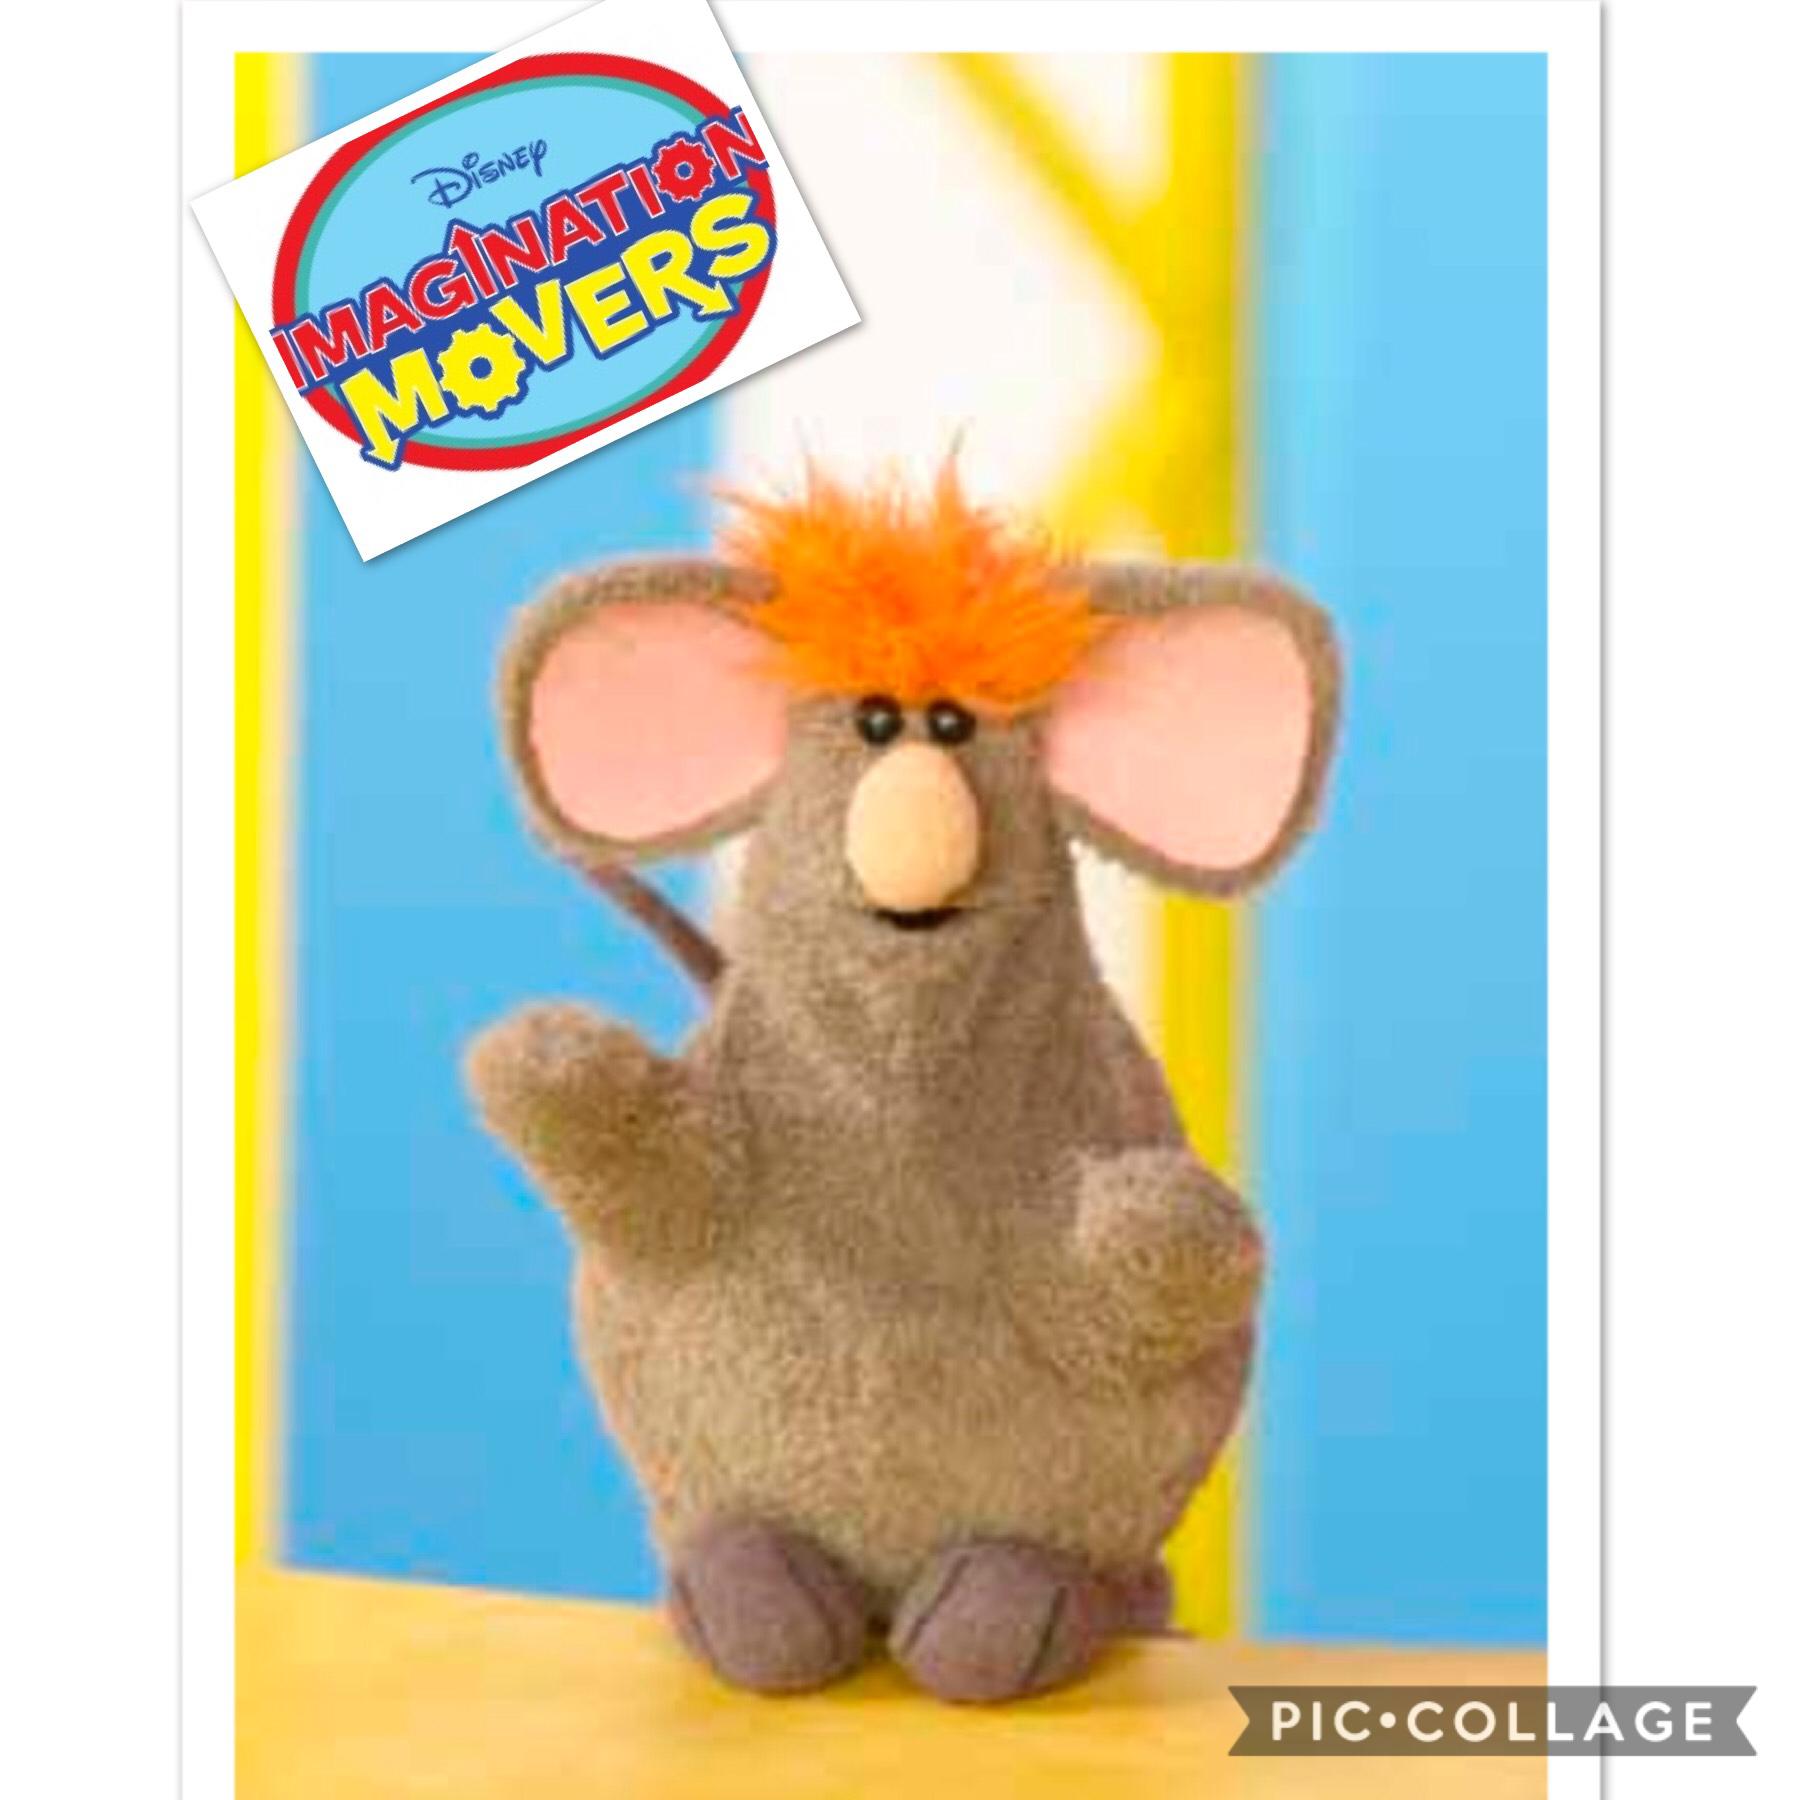 Imagination movers warehouse mouse 